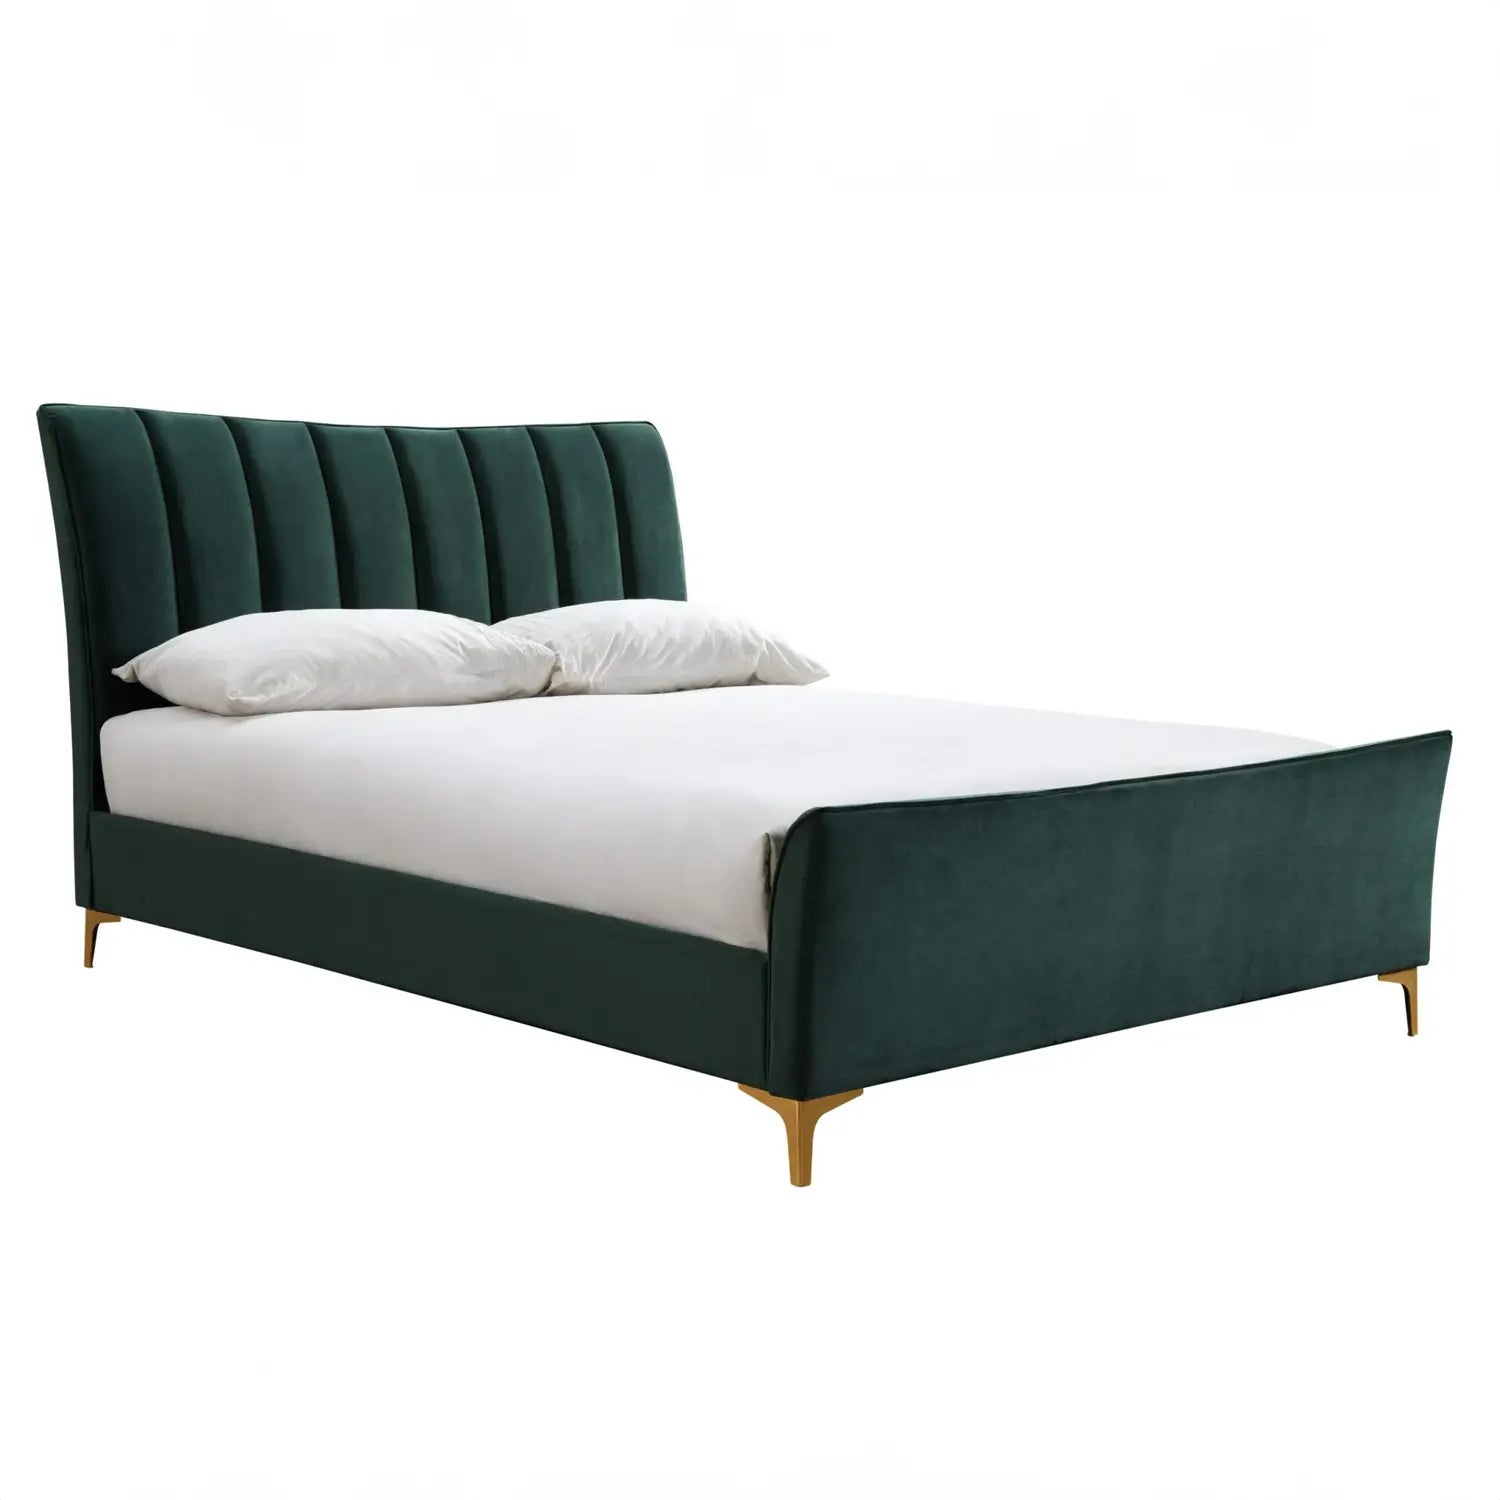 Flora Fabric Upholstered Bed - Small Double, Double or King